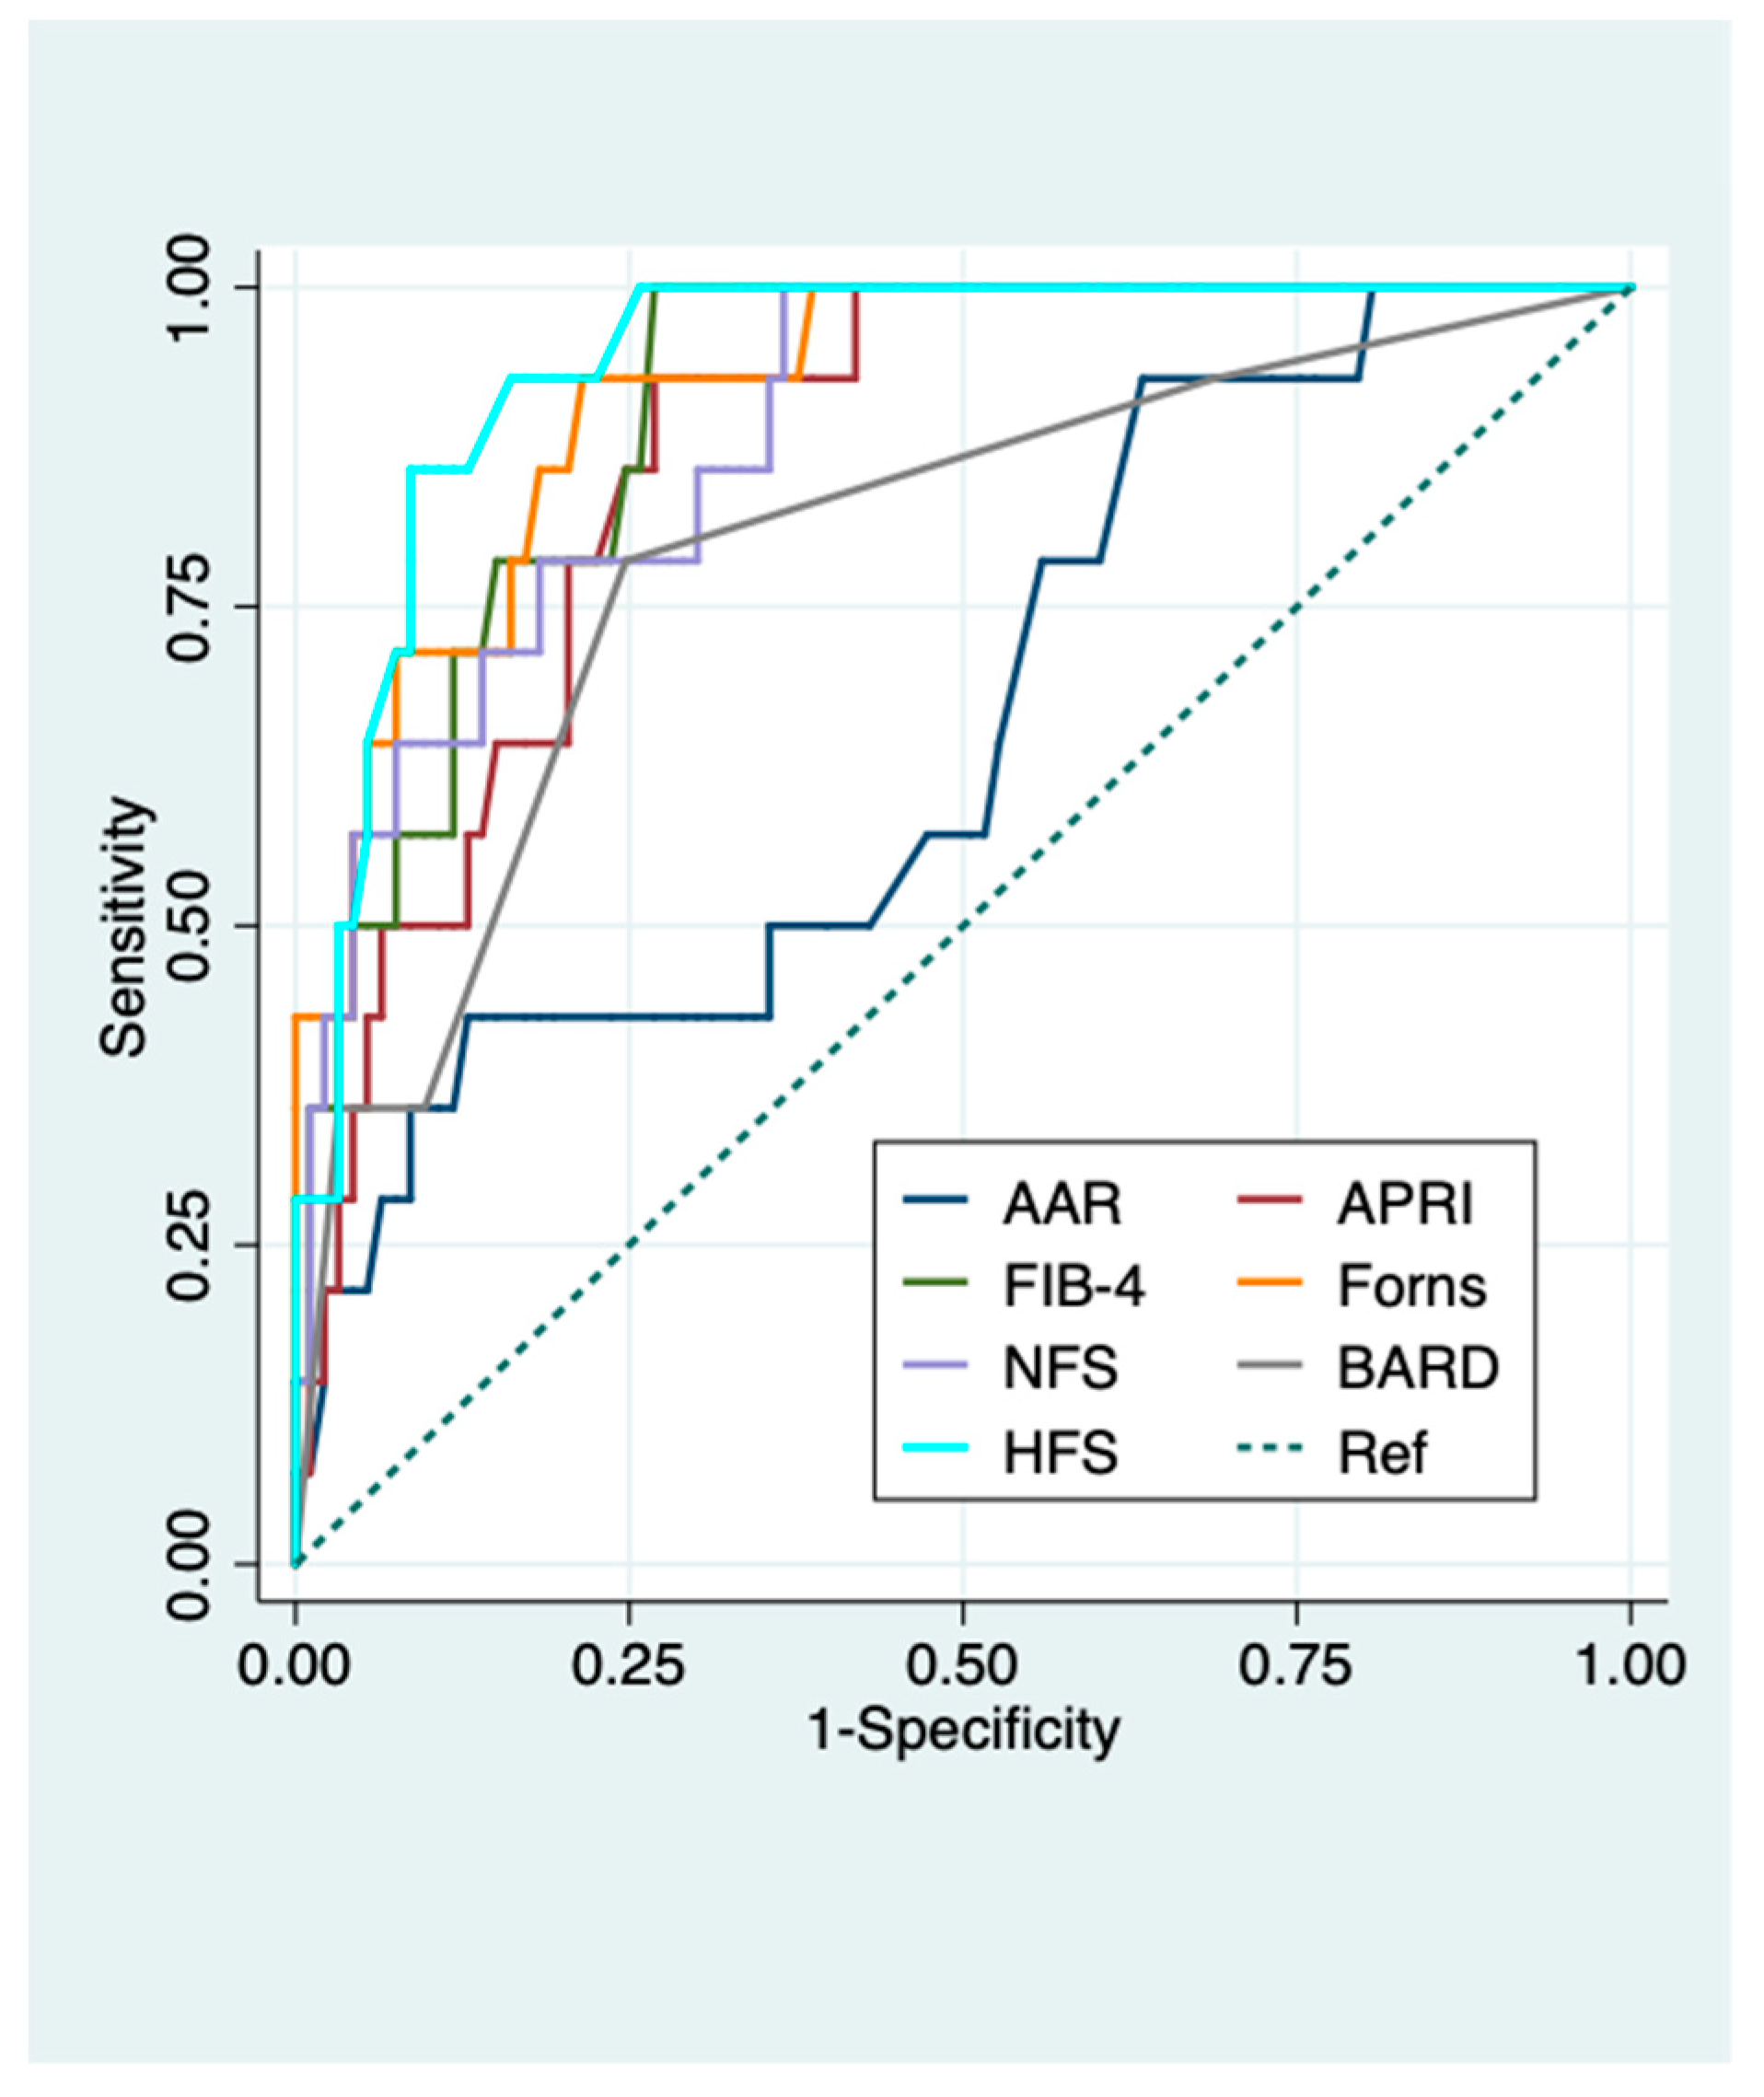 Diagnostics | Free Full-Text | Liver Fibrosis Biomarkers Accurately Exclude  Advanced Fibrosis and Are Associated with Higher Cardiovascular Risk Scores  in Patients with NAFLD or Viral Chronic Liver Disease